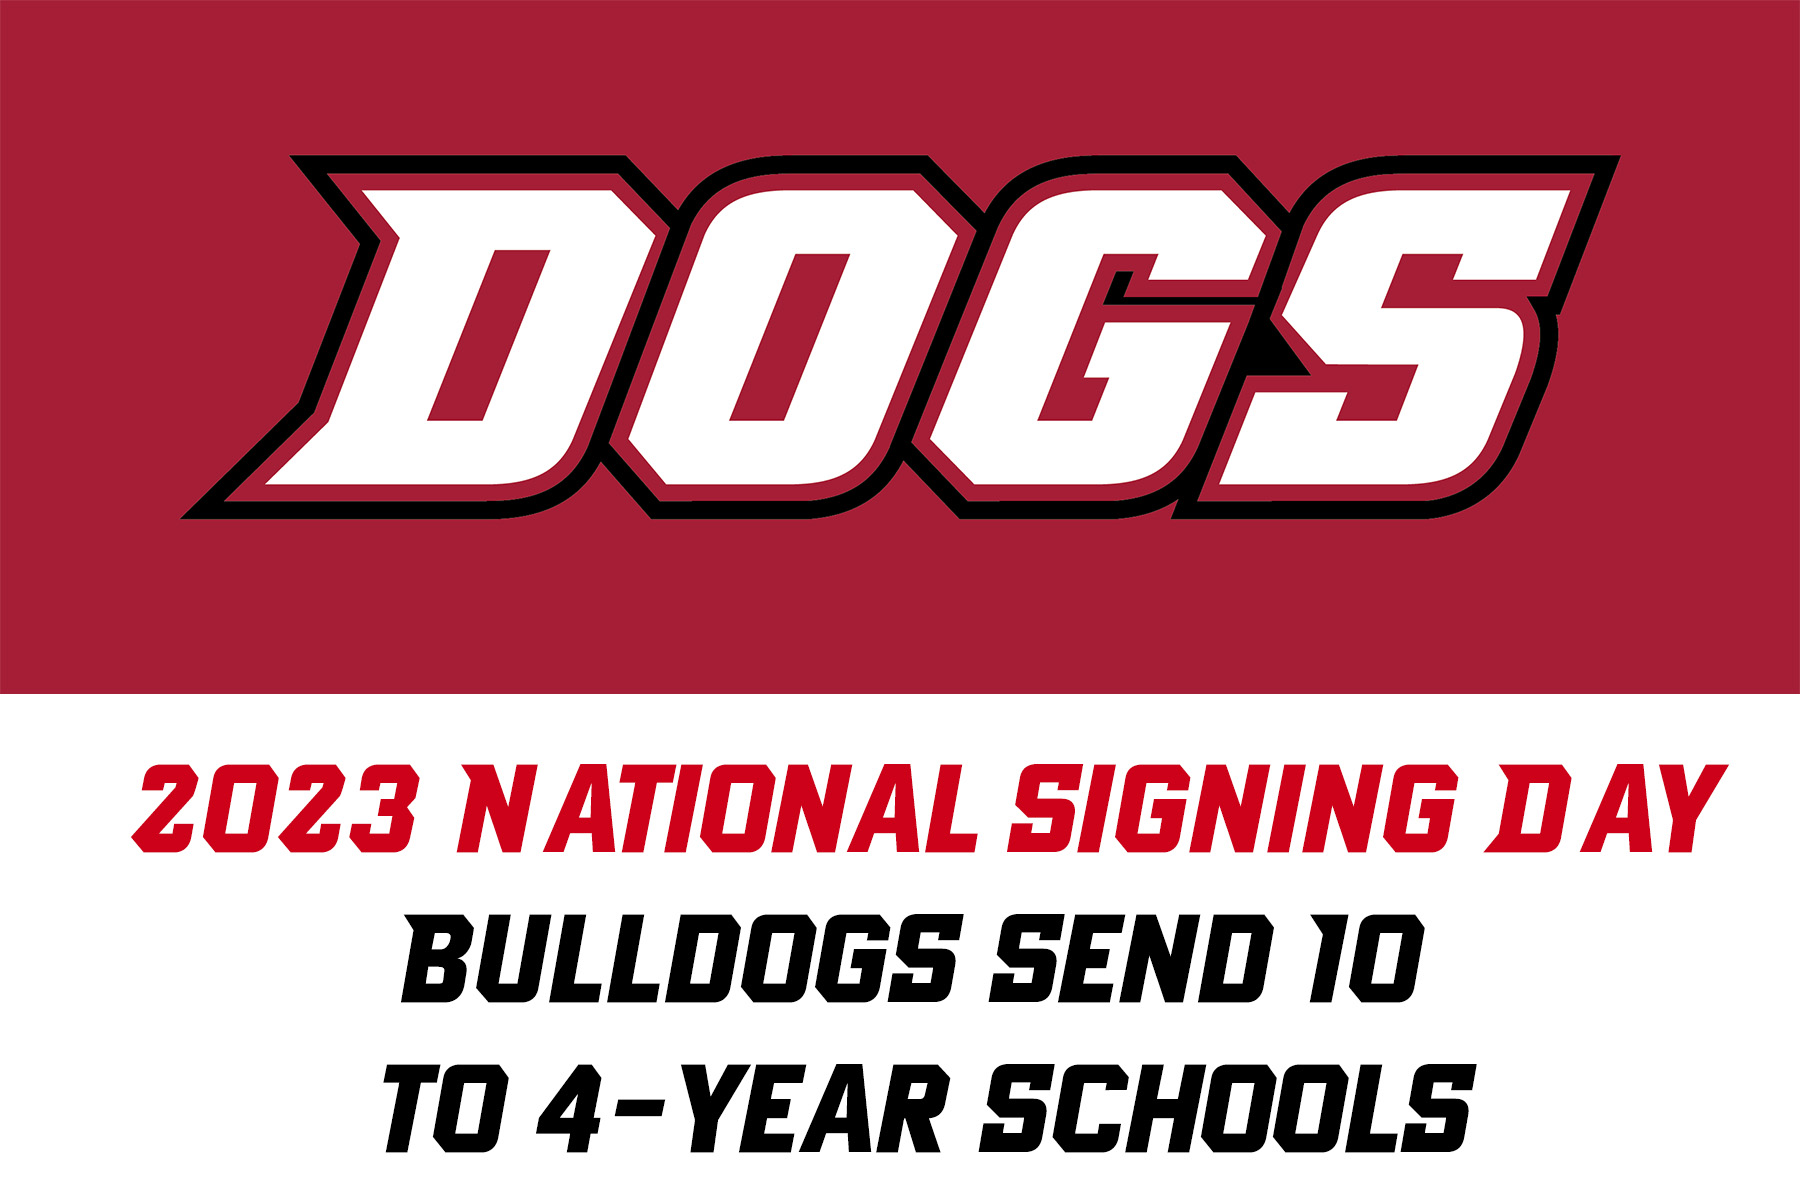 Bulldogs send 10 players to 4-year schools on National Signing Day